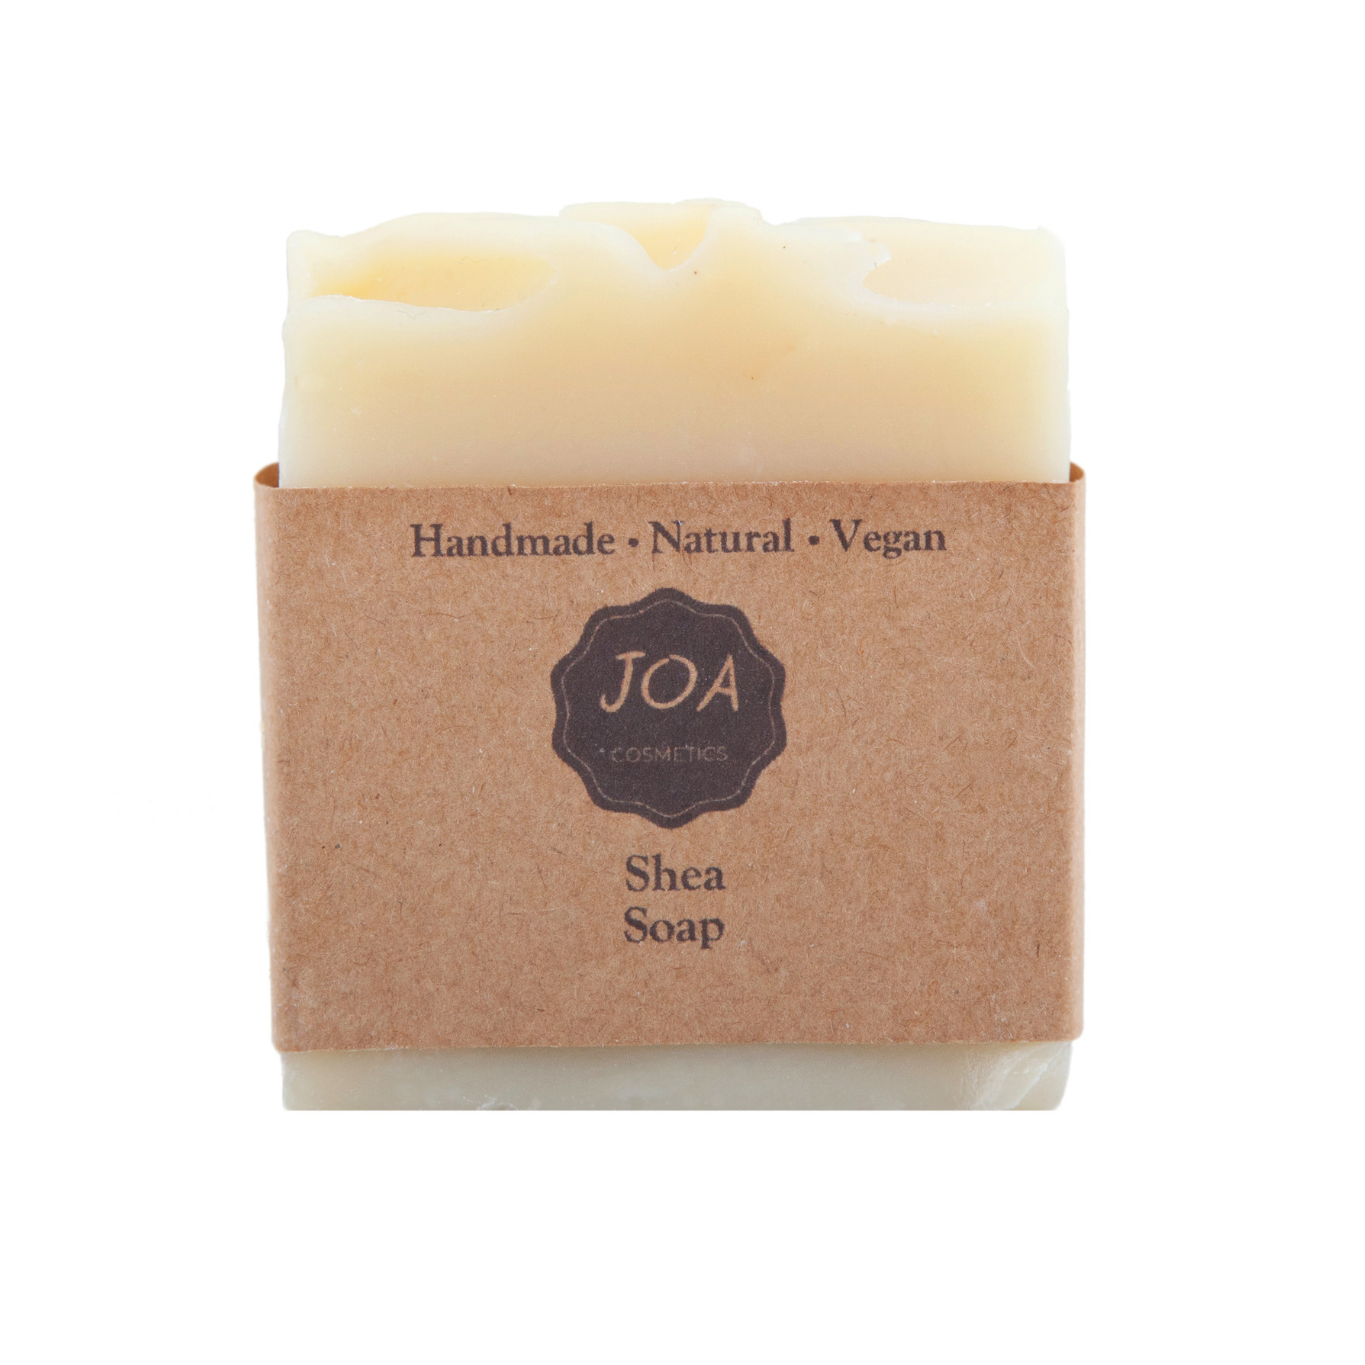 100% Natural - Handmade. Vegan - Palm Oil Free. Contains shea butter. The best handmade soap.